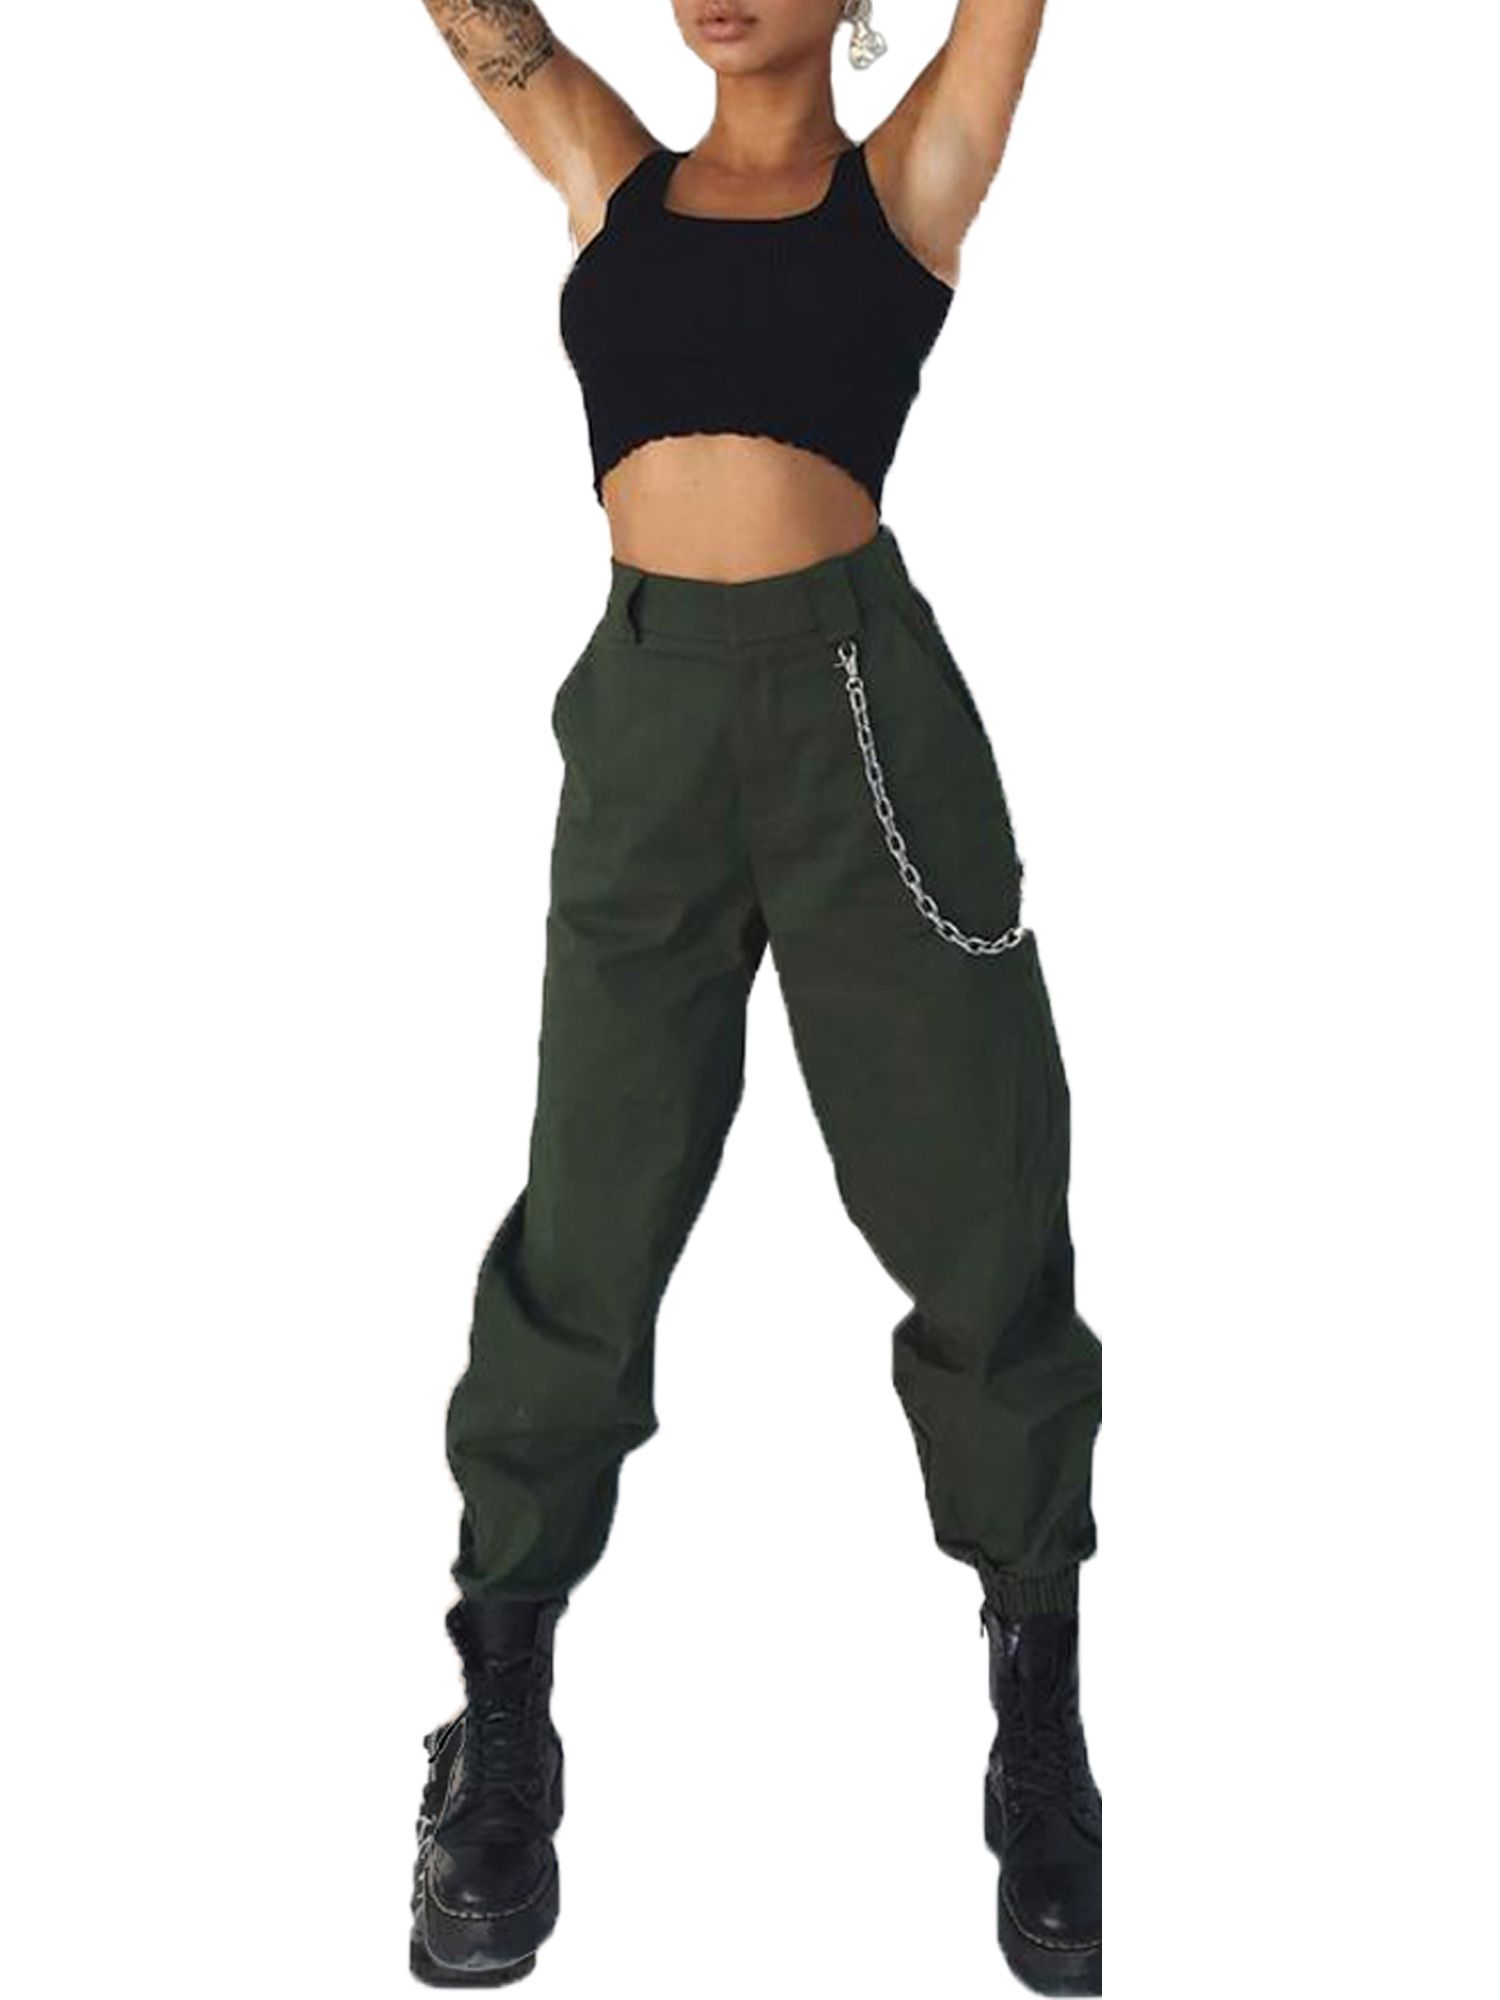 Wear combat pants with right appeals to
look trendy